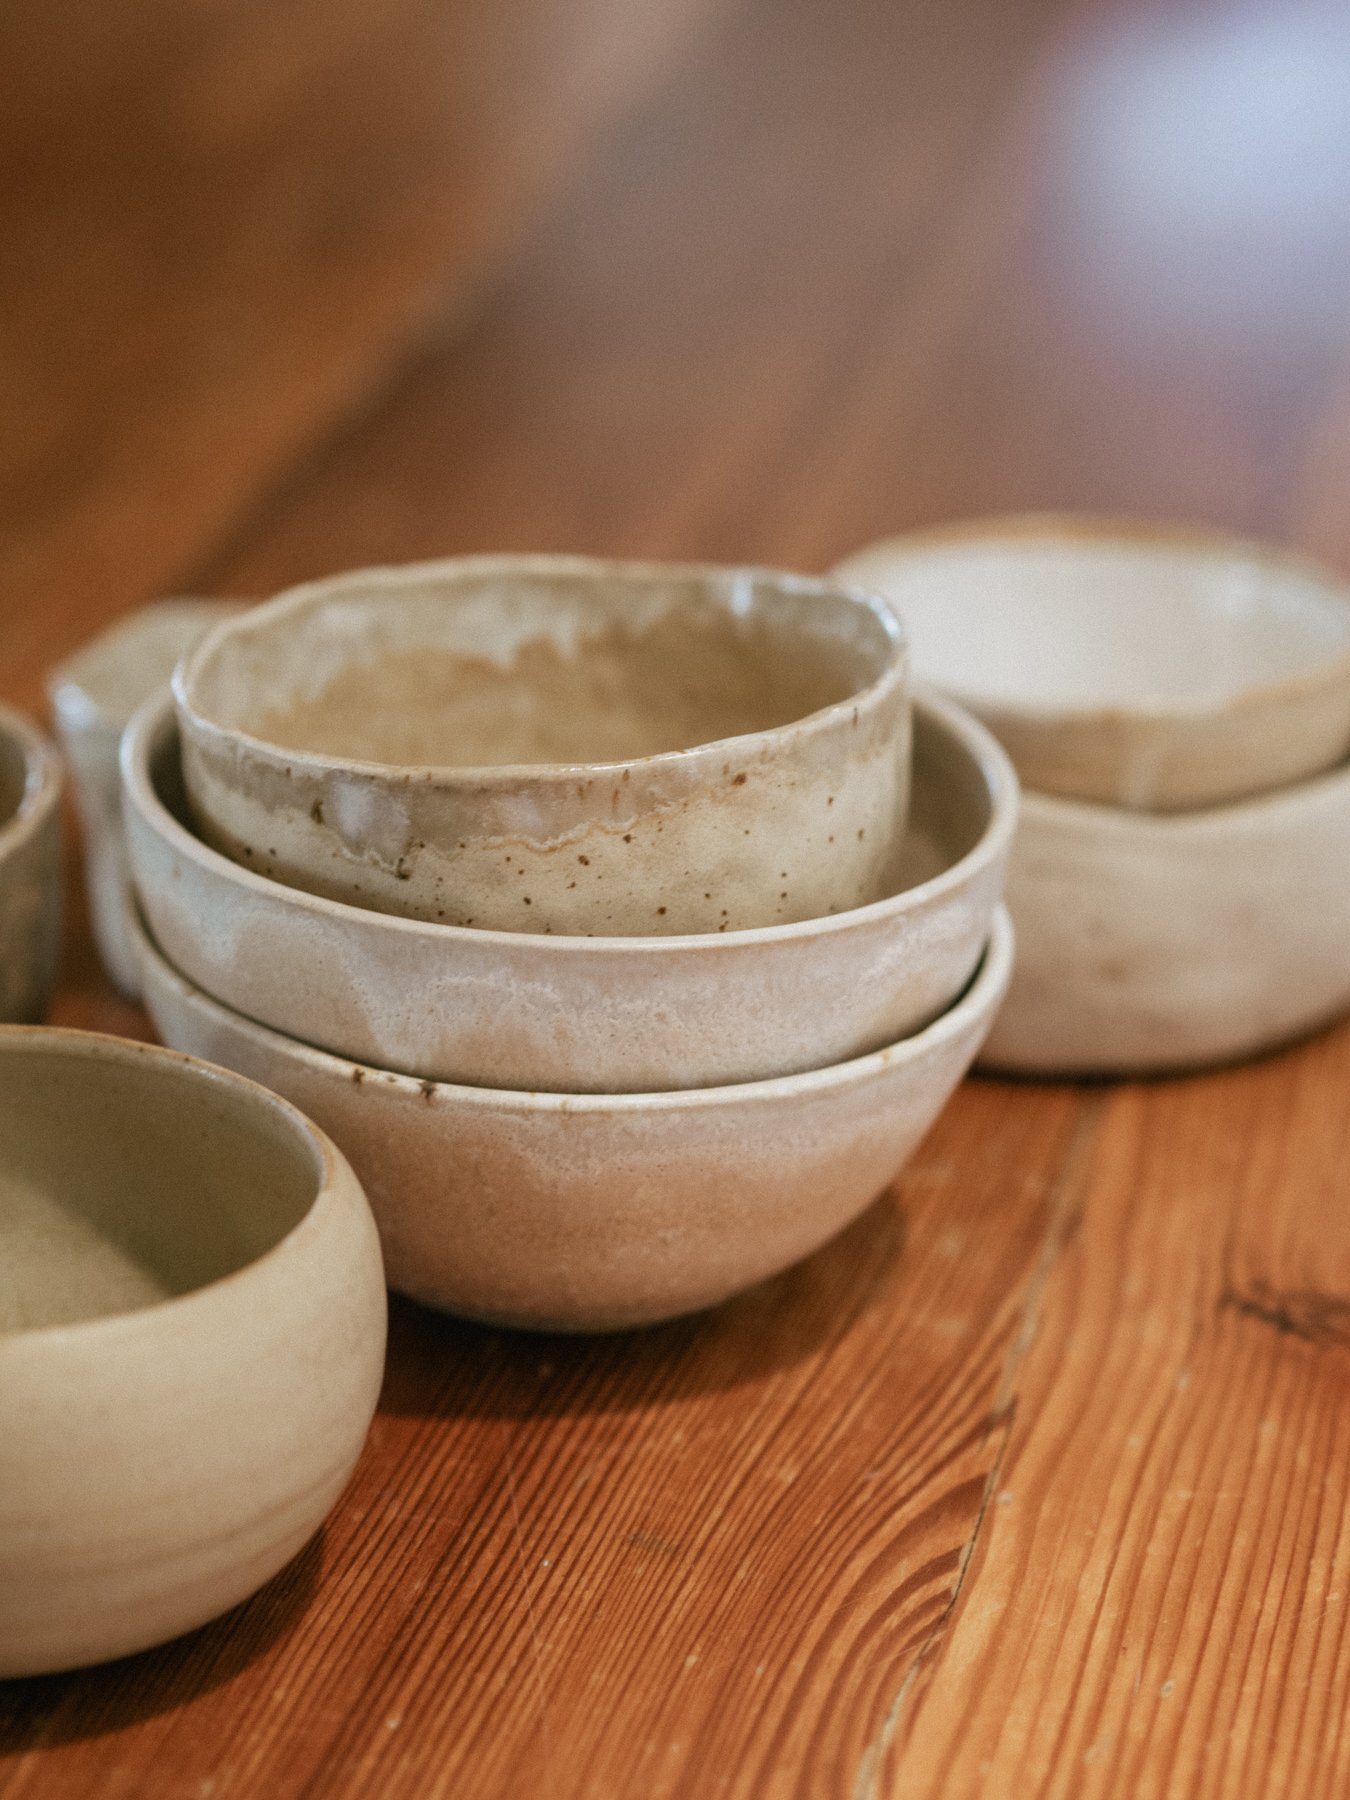 Handmade Pottery at Yoga Event in Vienna